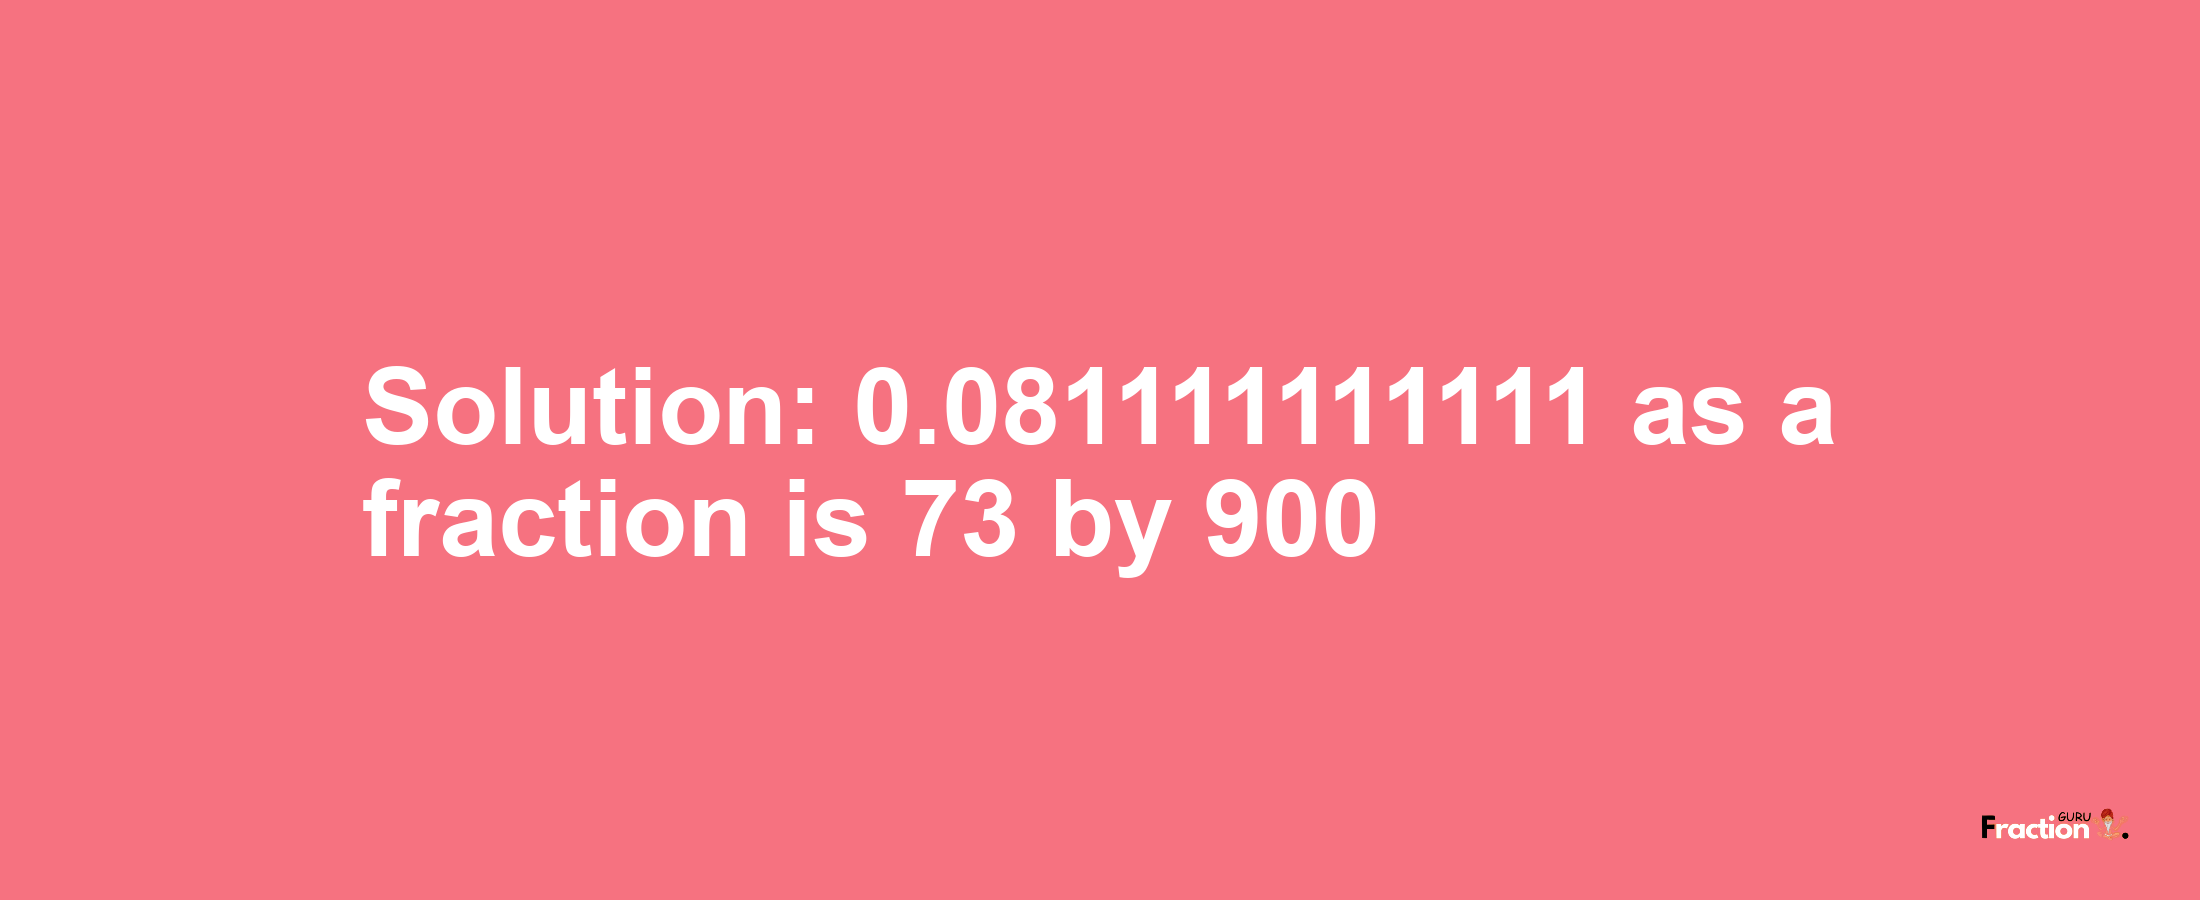 Solution:0.081111111111 as a fraction is 73/900